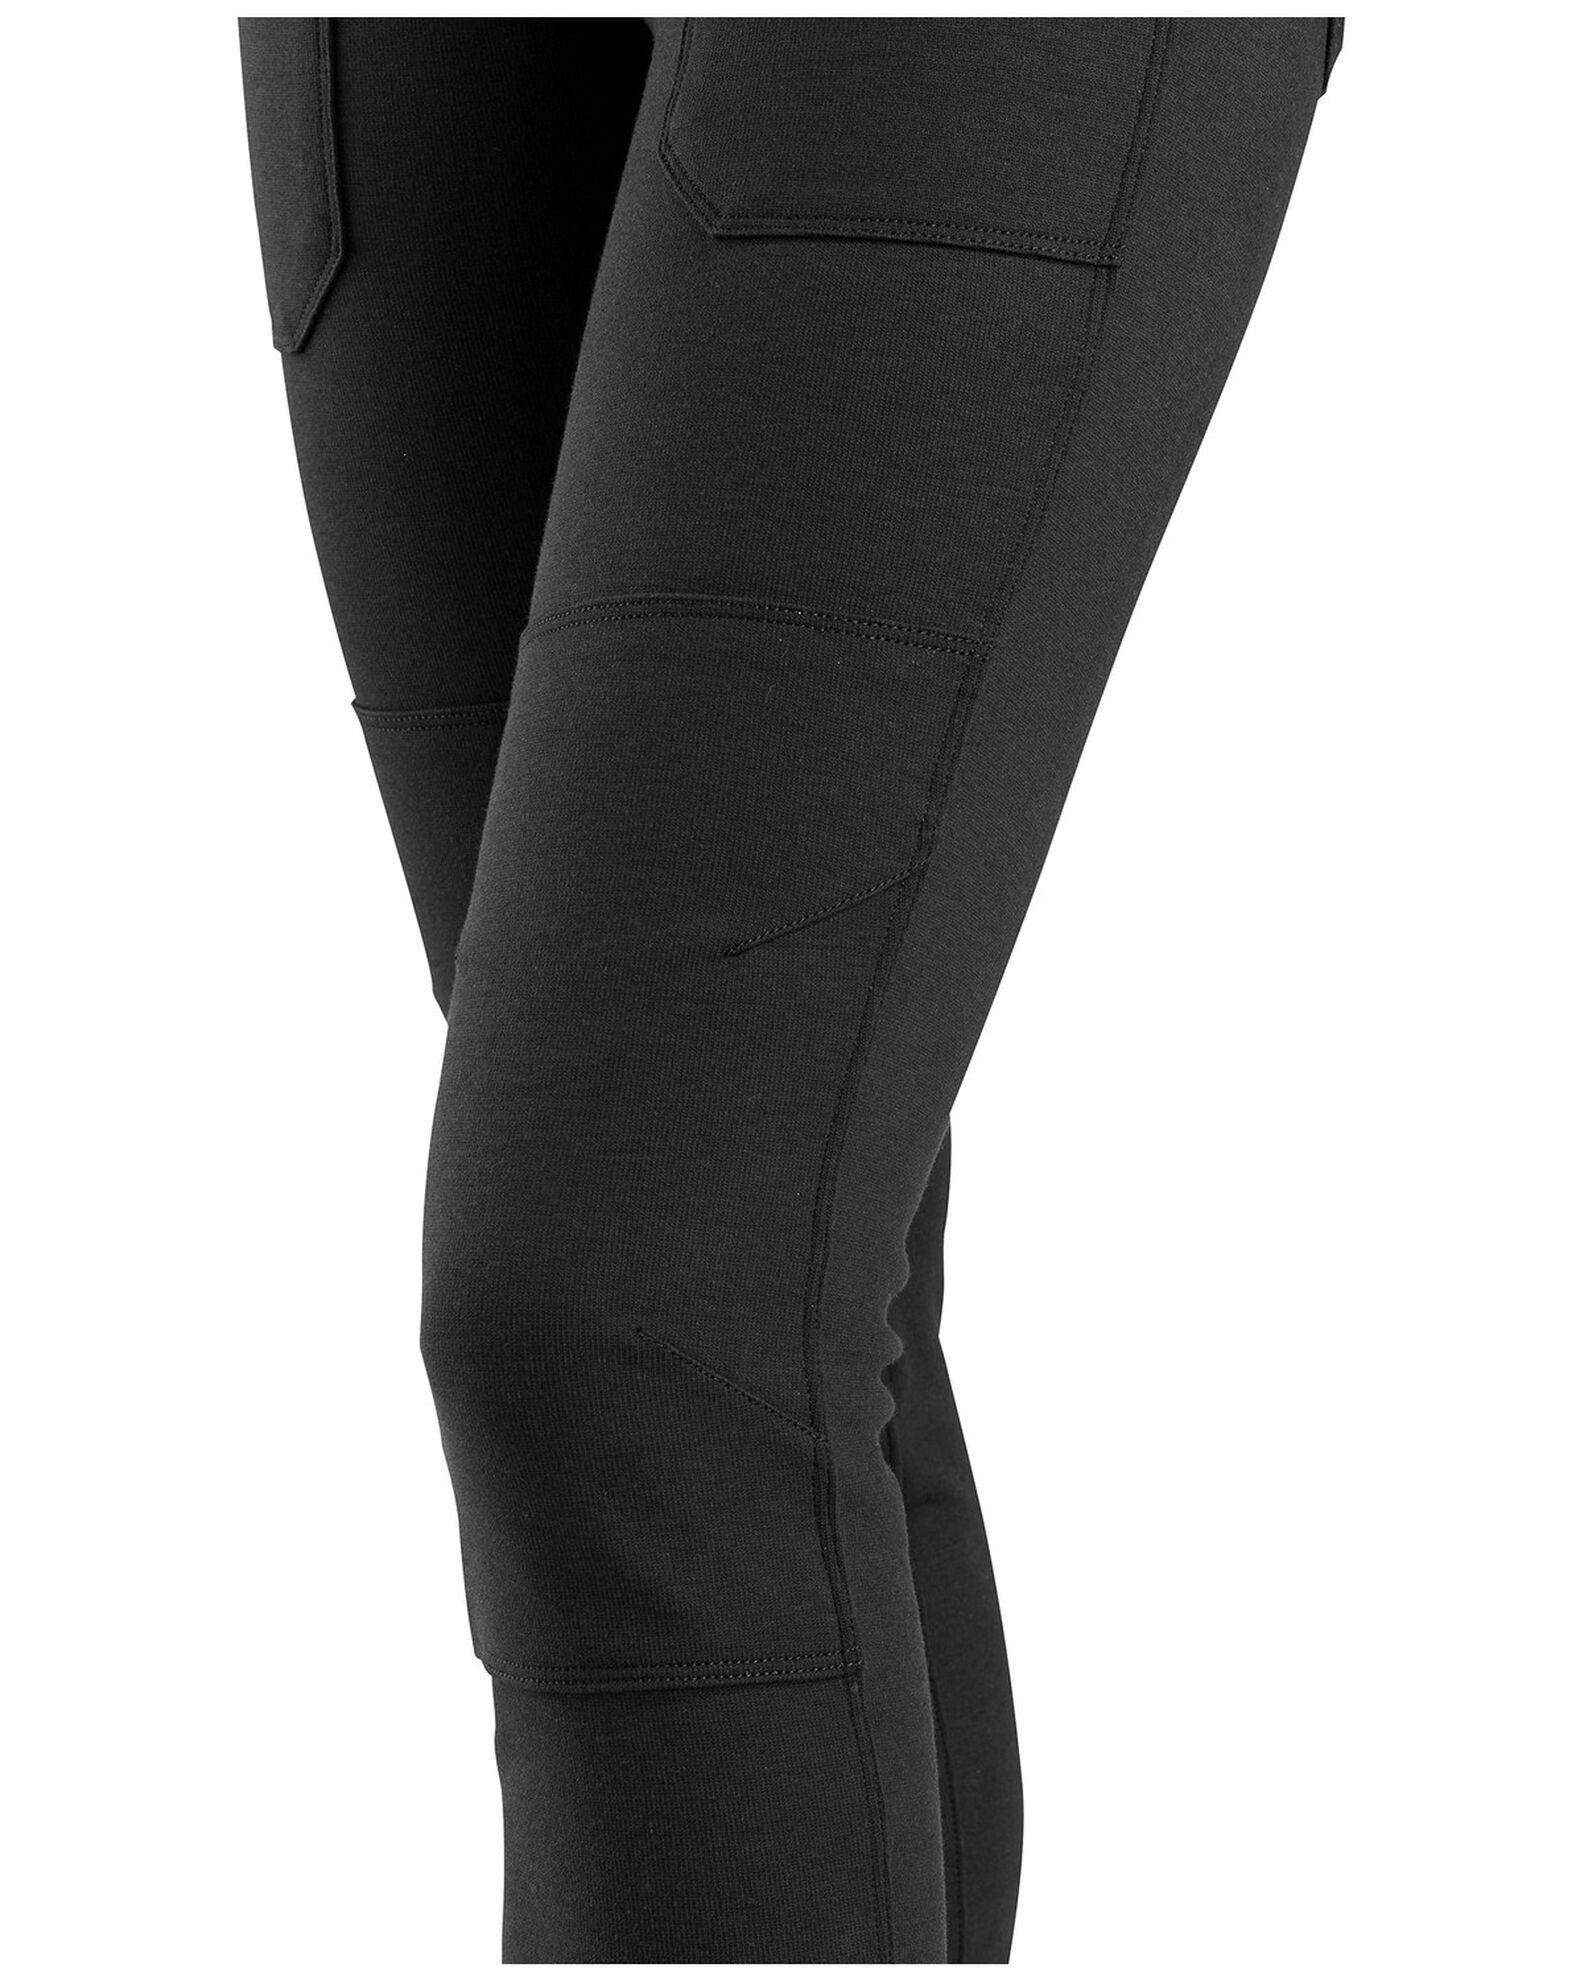 Women's Force Fitted Midweight Utility Legging